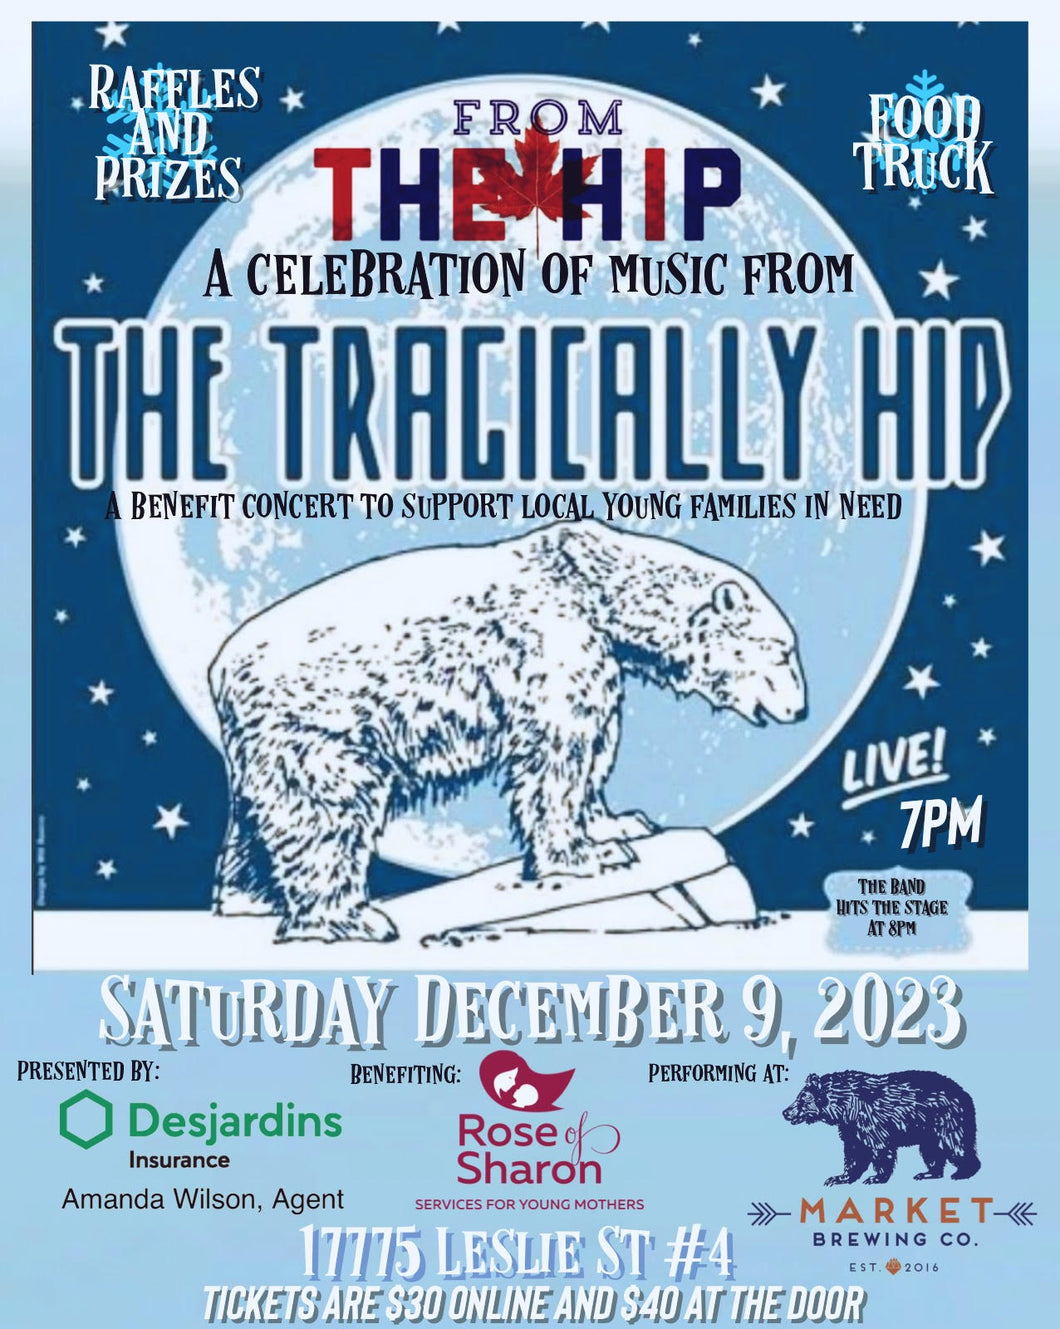 'From the Hip' Concert supporting Rose of Sharon (Dec 9)